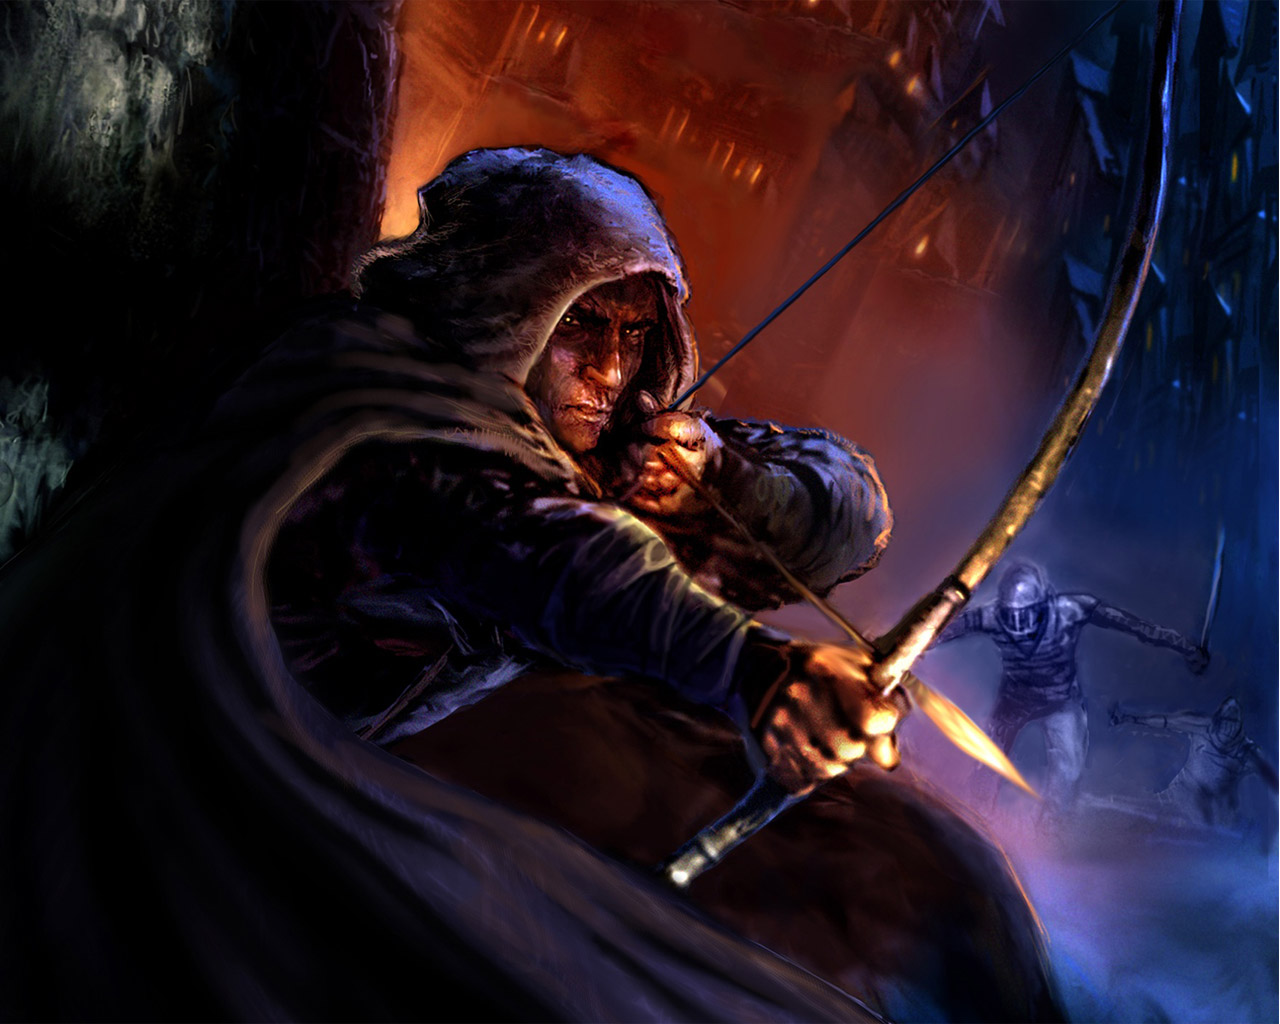 thief wallpaper,action adventure game,darkness,cg artwork,fictional character,illustration